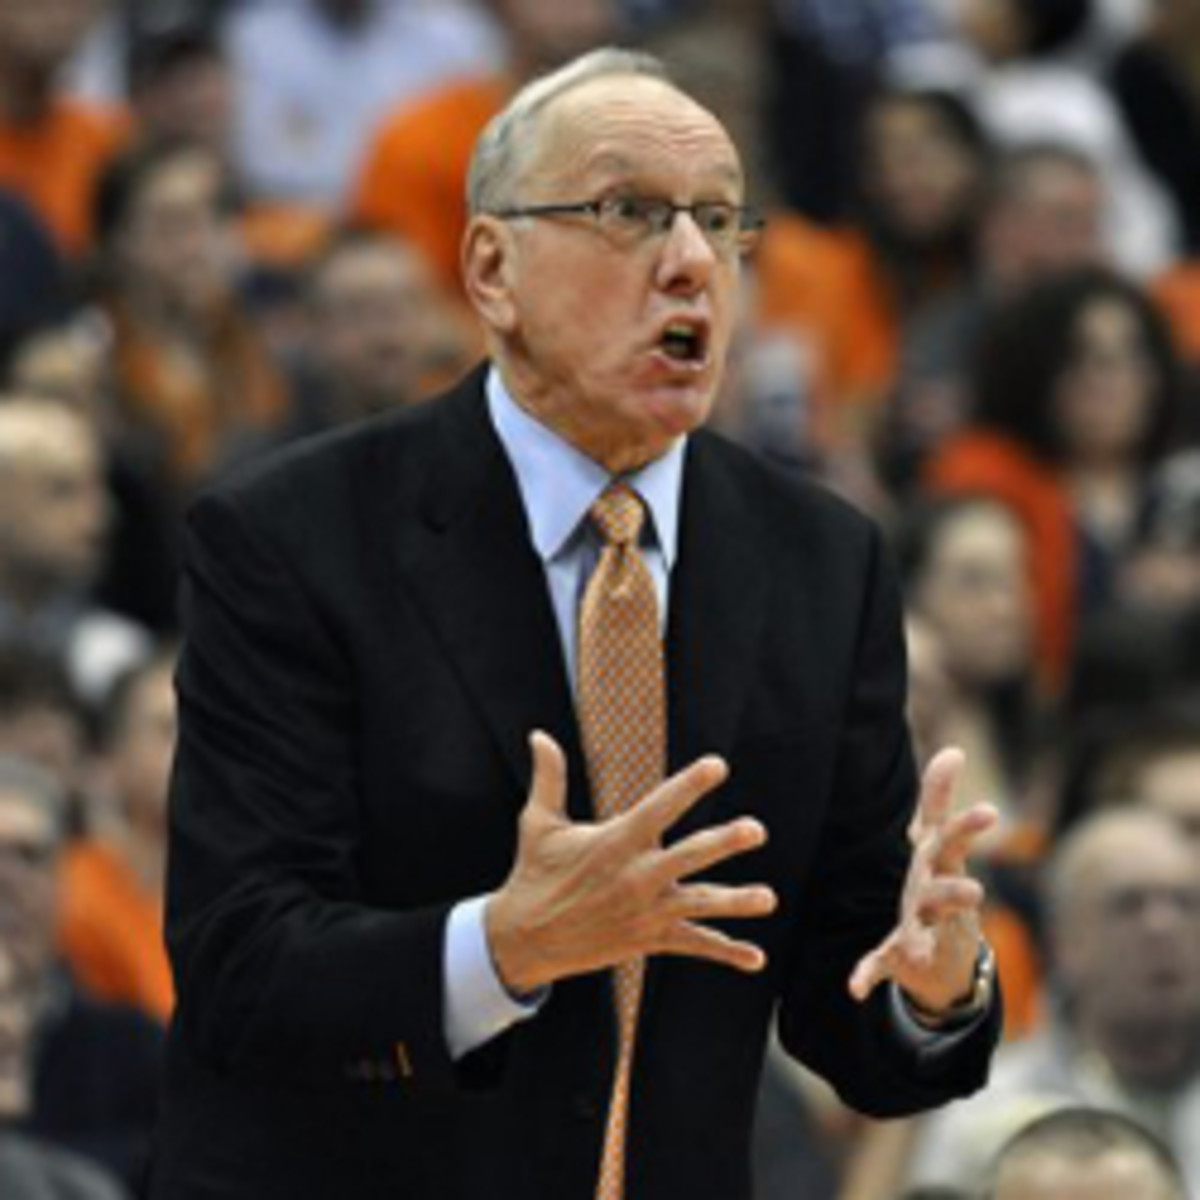 Jim Boeheim made an impassioned plea for gun control after winning his 900th career game as Syracuse's head coach on Monday. (AP/Kevin Rivoli)